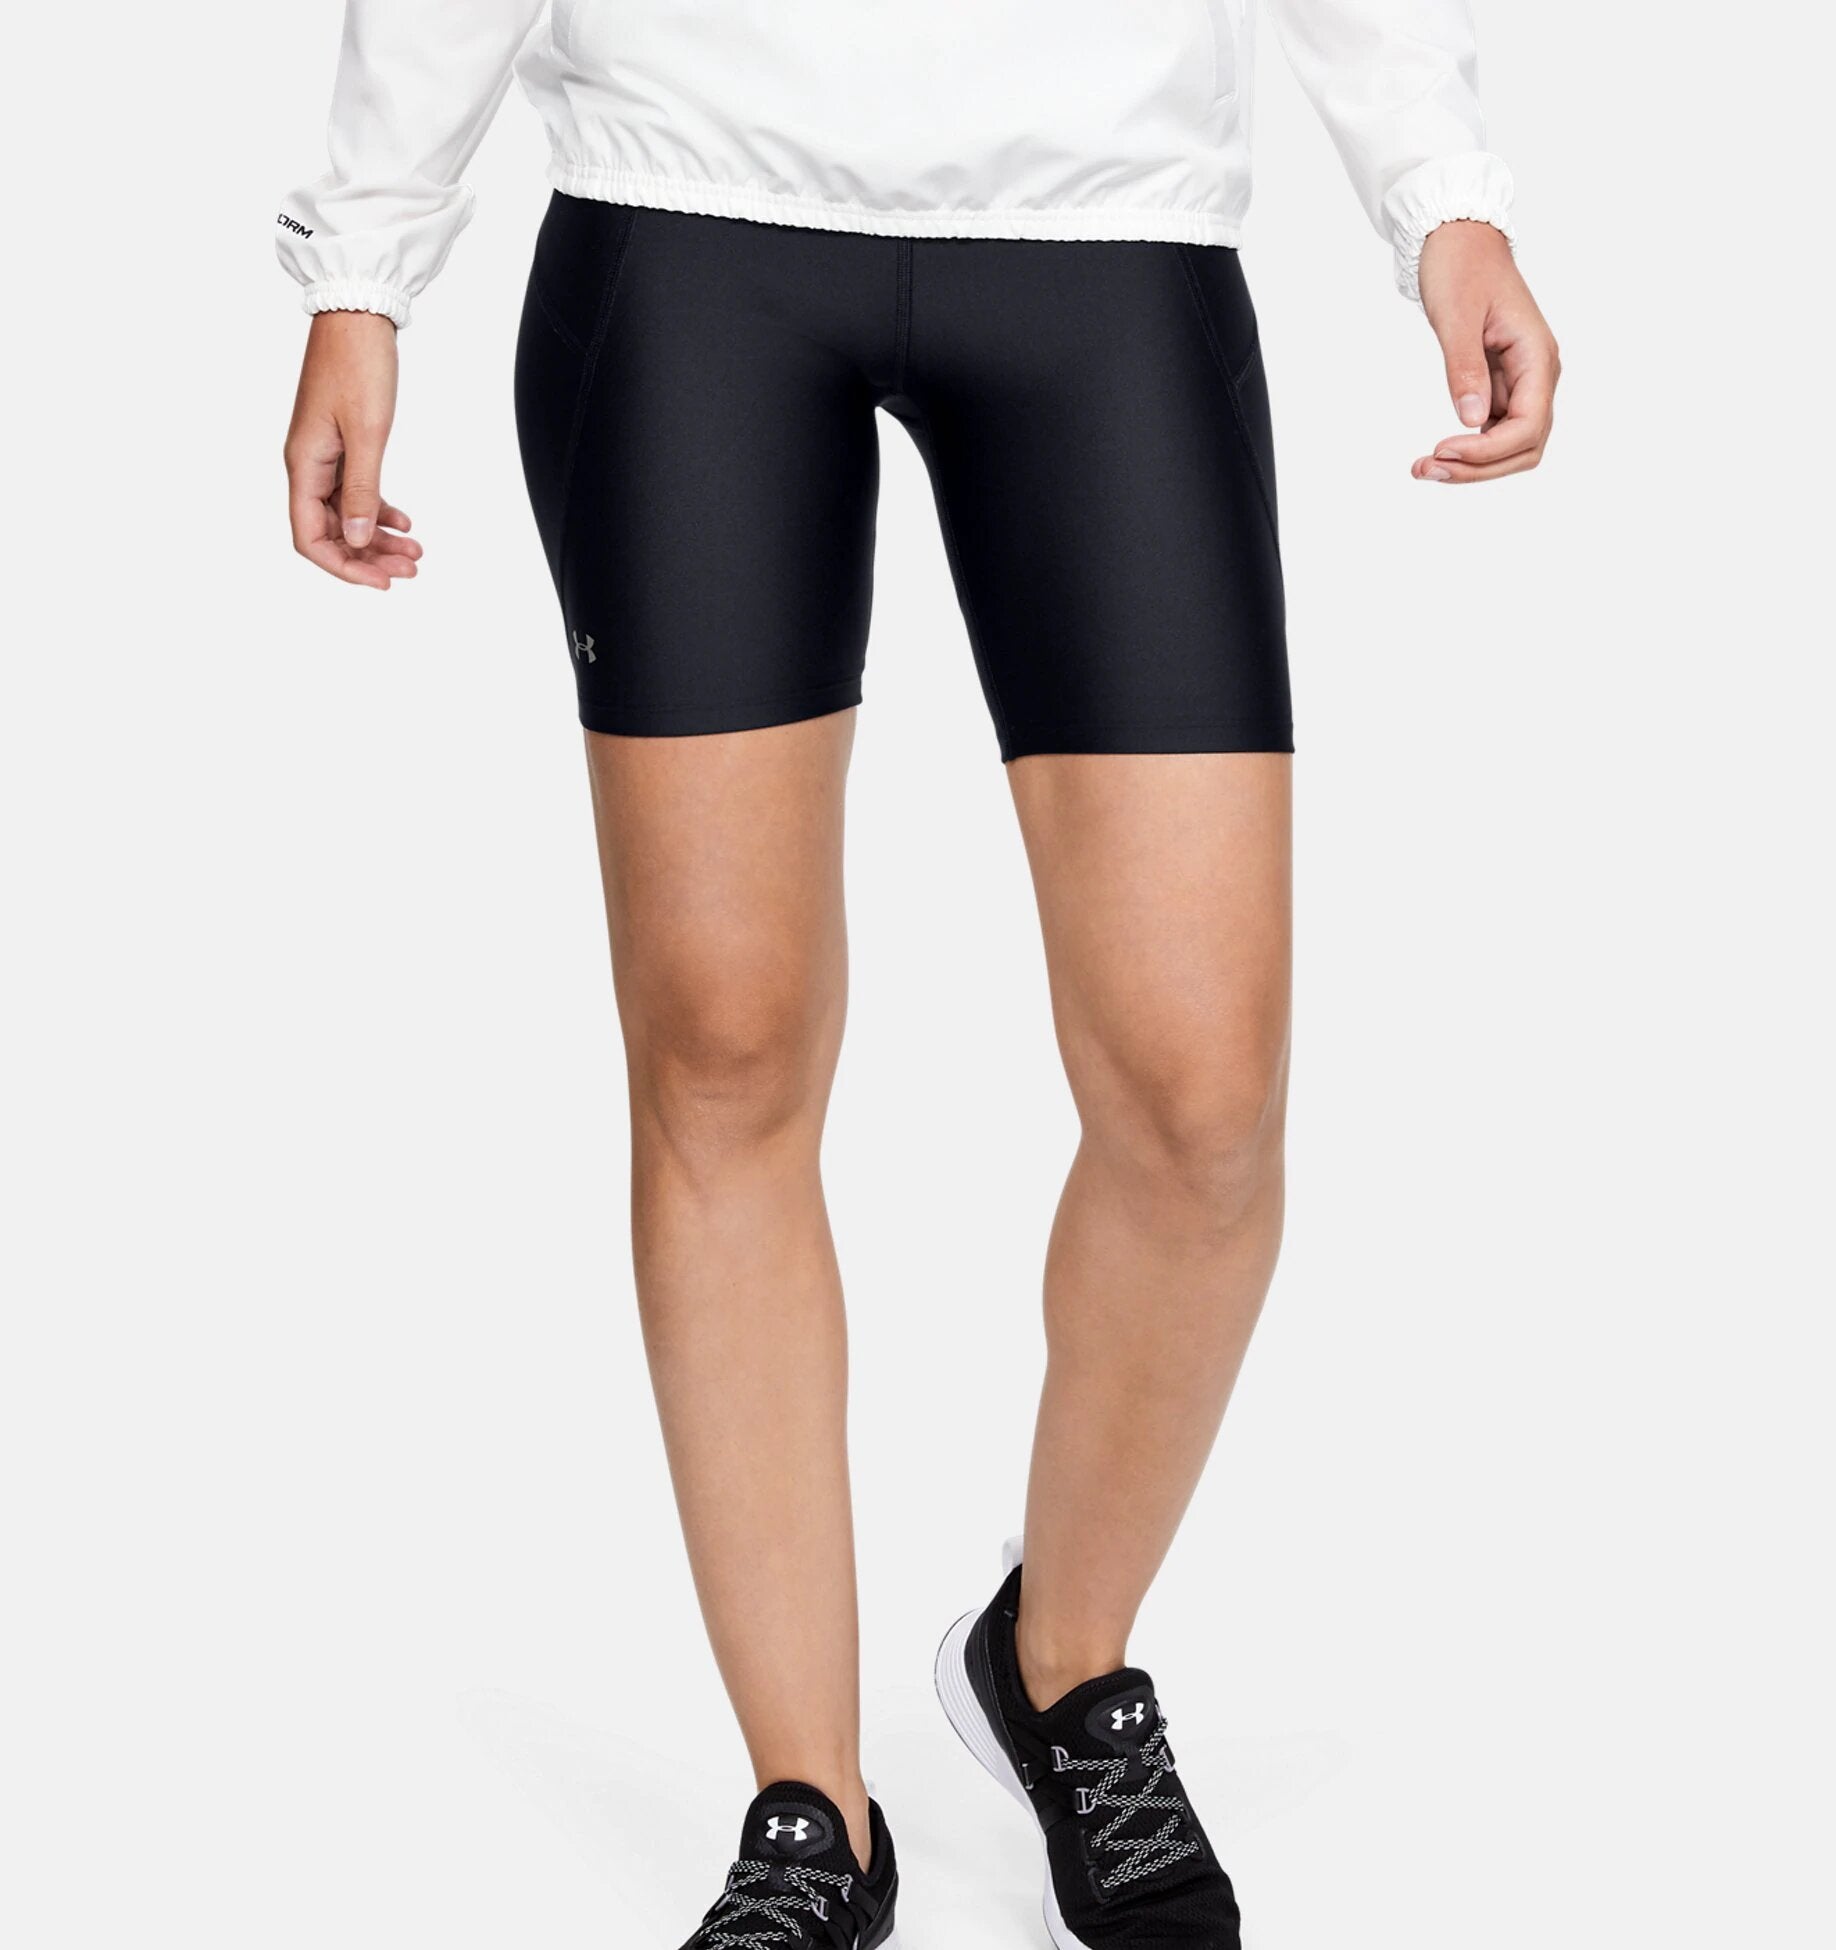 womens bike shorts with side pockets